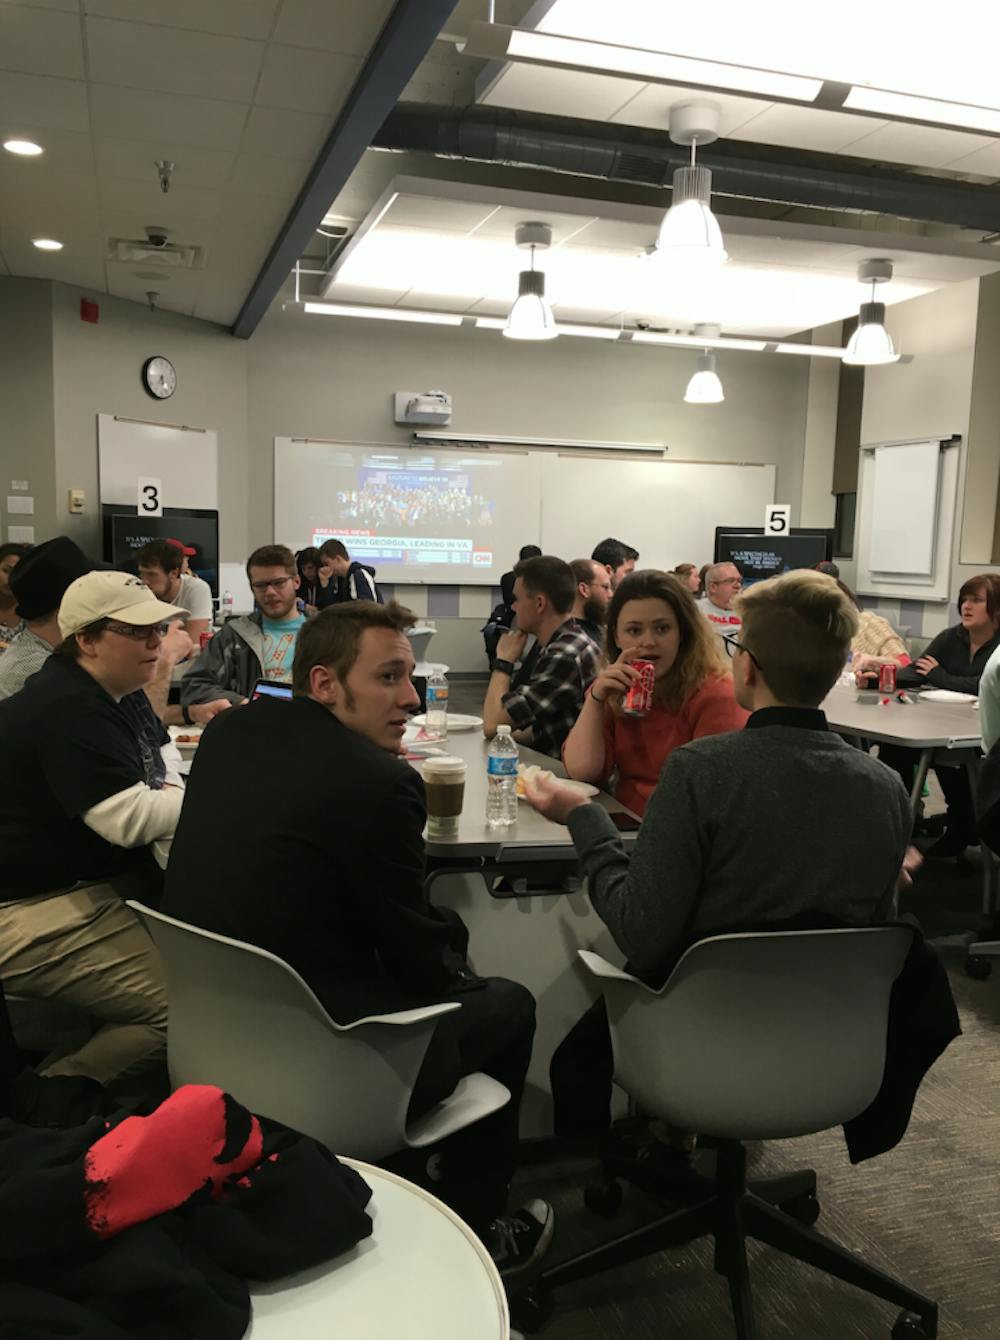 <p>The Political Science Department hosted a viewing party on March 1 to watch the results from the&nbsp;11 primaries for the presidential elections.<em>&nbsp;</em><i style="background-color: initial;">DN PHOTO MICHELLE KAUFMAN</i></p>